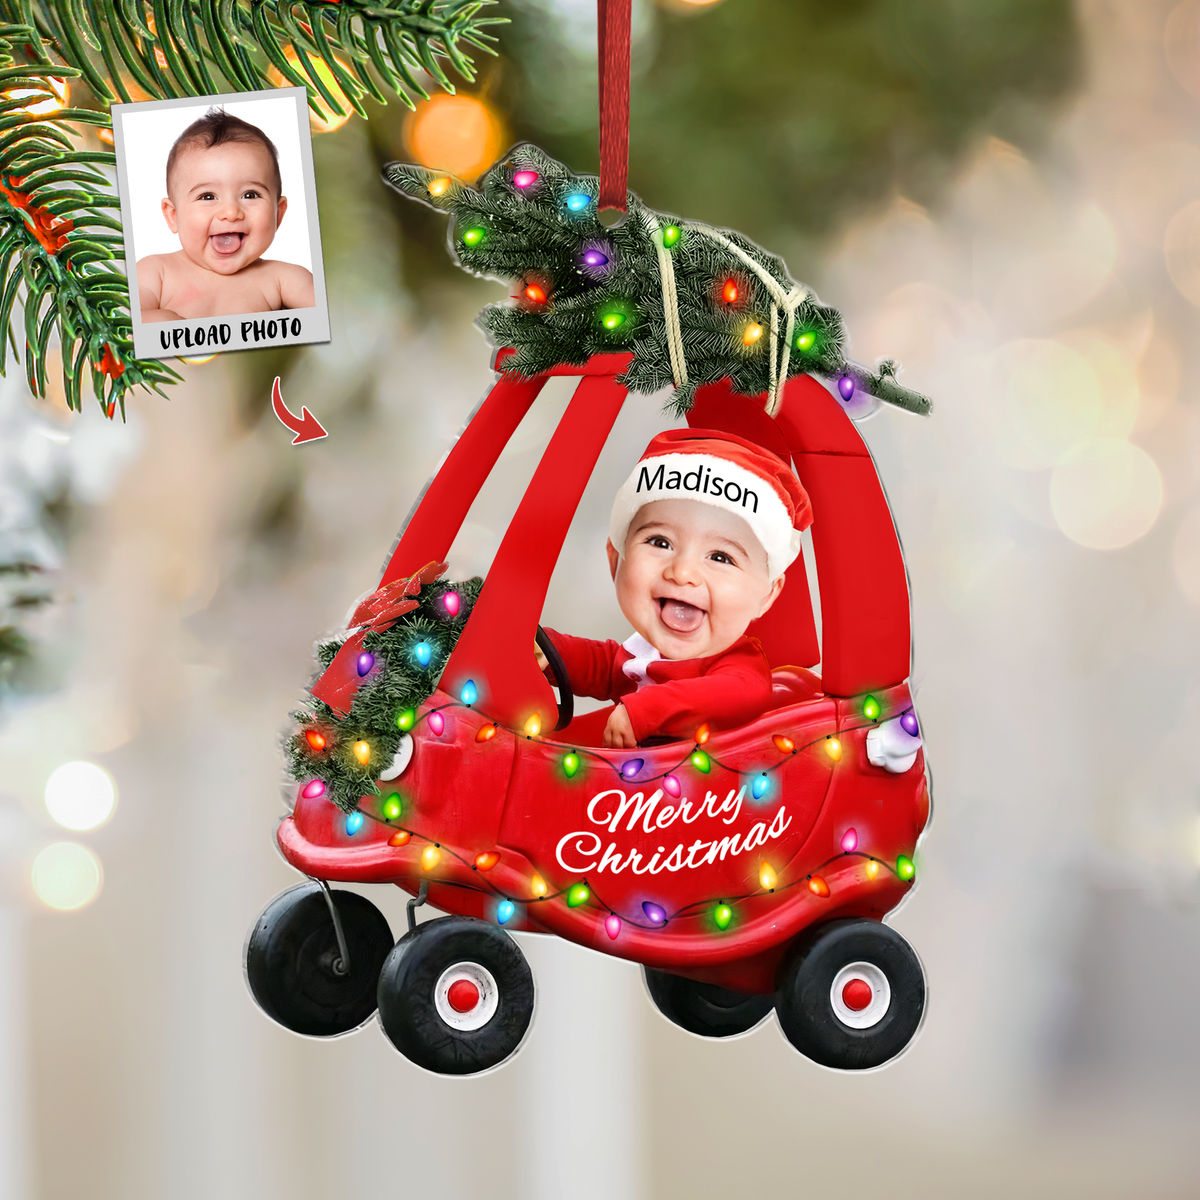 Photo Ornament - Adorable Newborn Baby - Baby Christmas - Custom Ornament from Photo - Christmas Gifts For Dad, Mom, Family_2